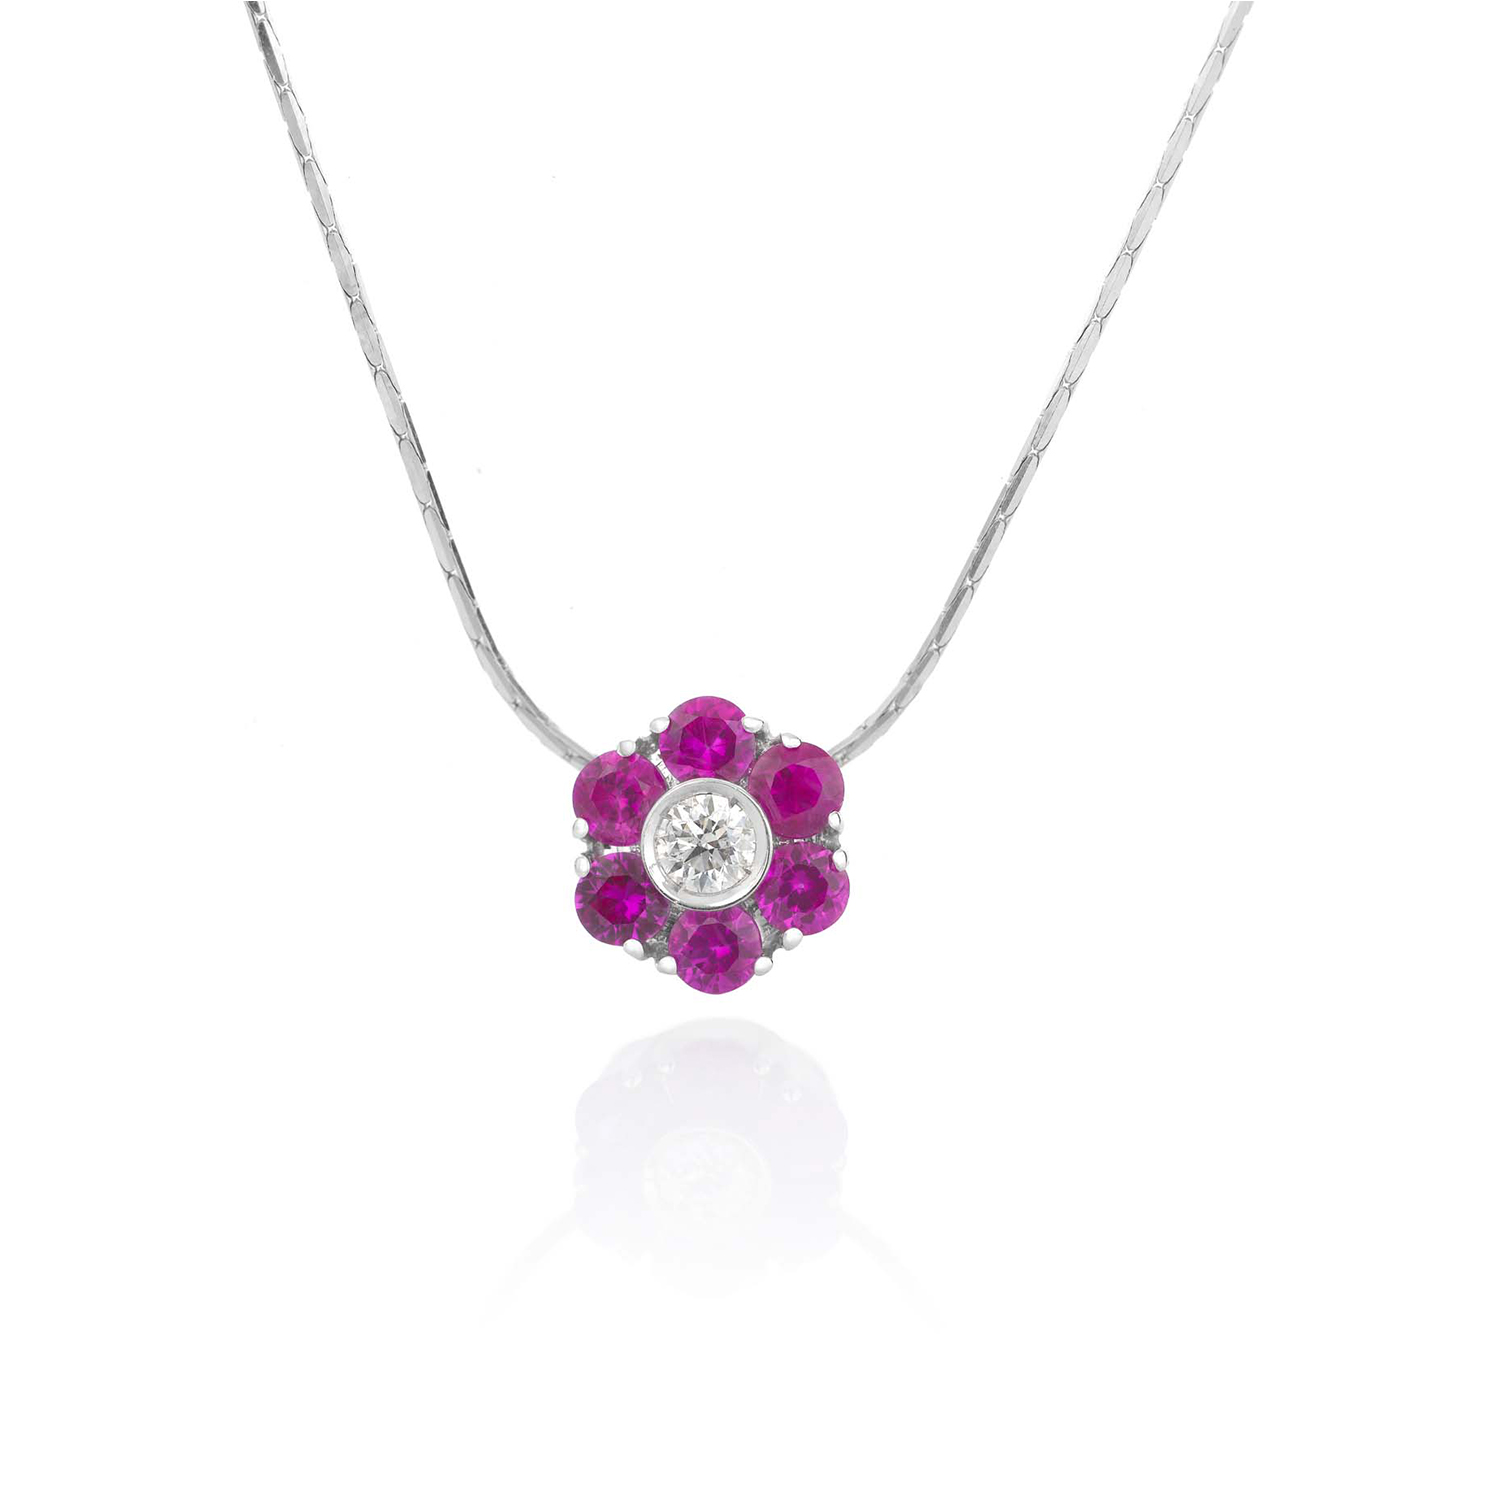 Sensi joyas jewellery Granada silver engagement18K WHITE GOLD NECKLACE WITH 0.85CT RUBIES AND A 0.12CT DIAMOND